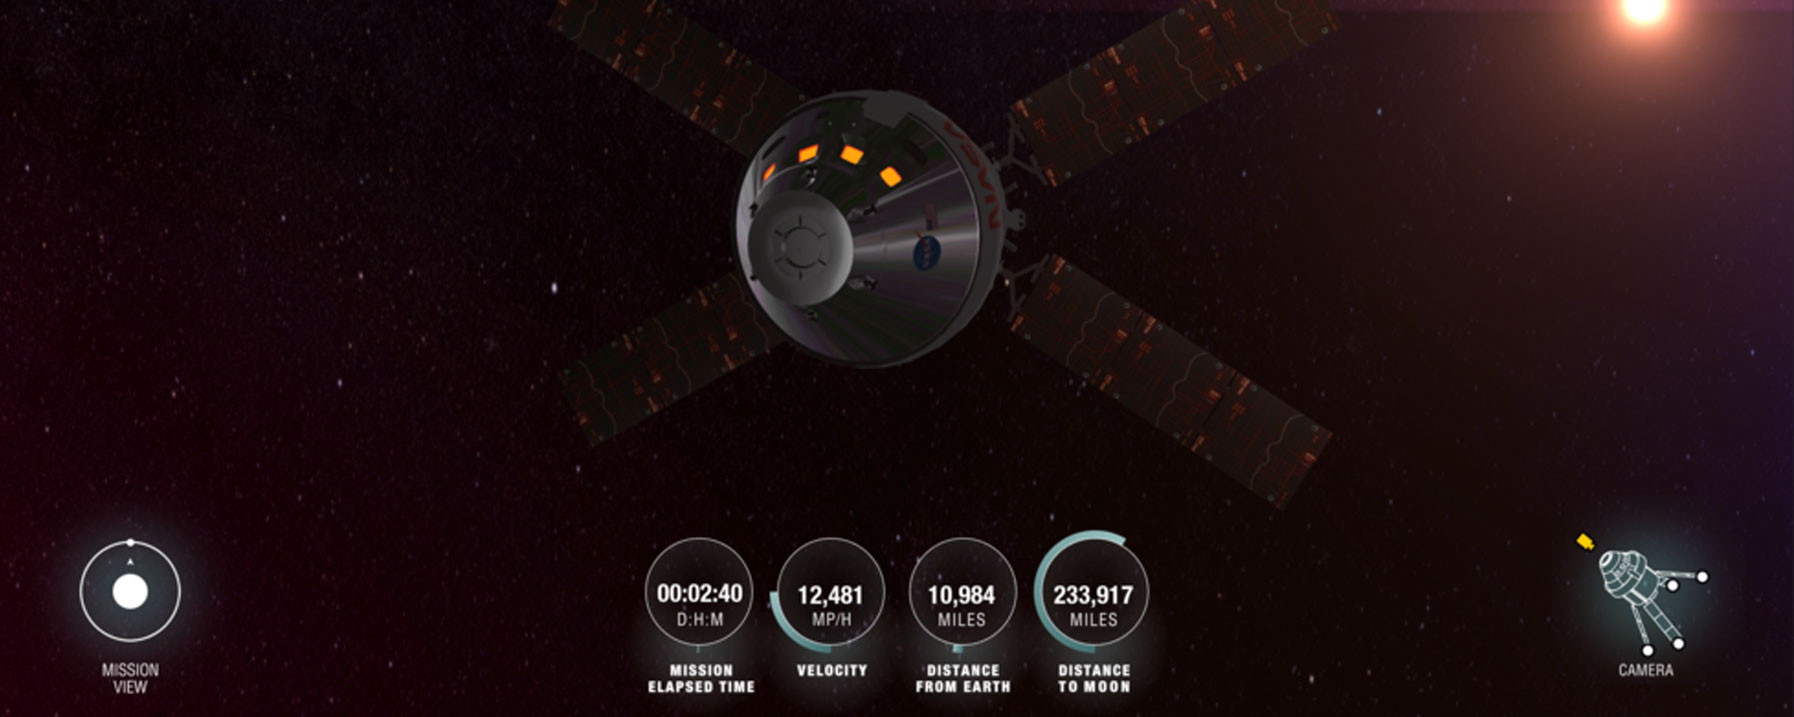 Using AROW, almost anyone with internet access can pinpoint where Orion is and track its distance from the Earth, distance from the Moon, mission duration, and more.
